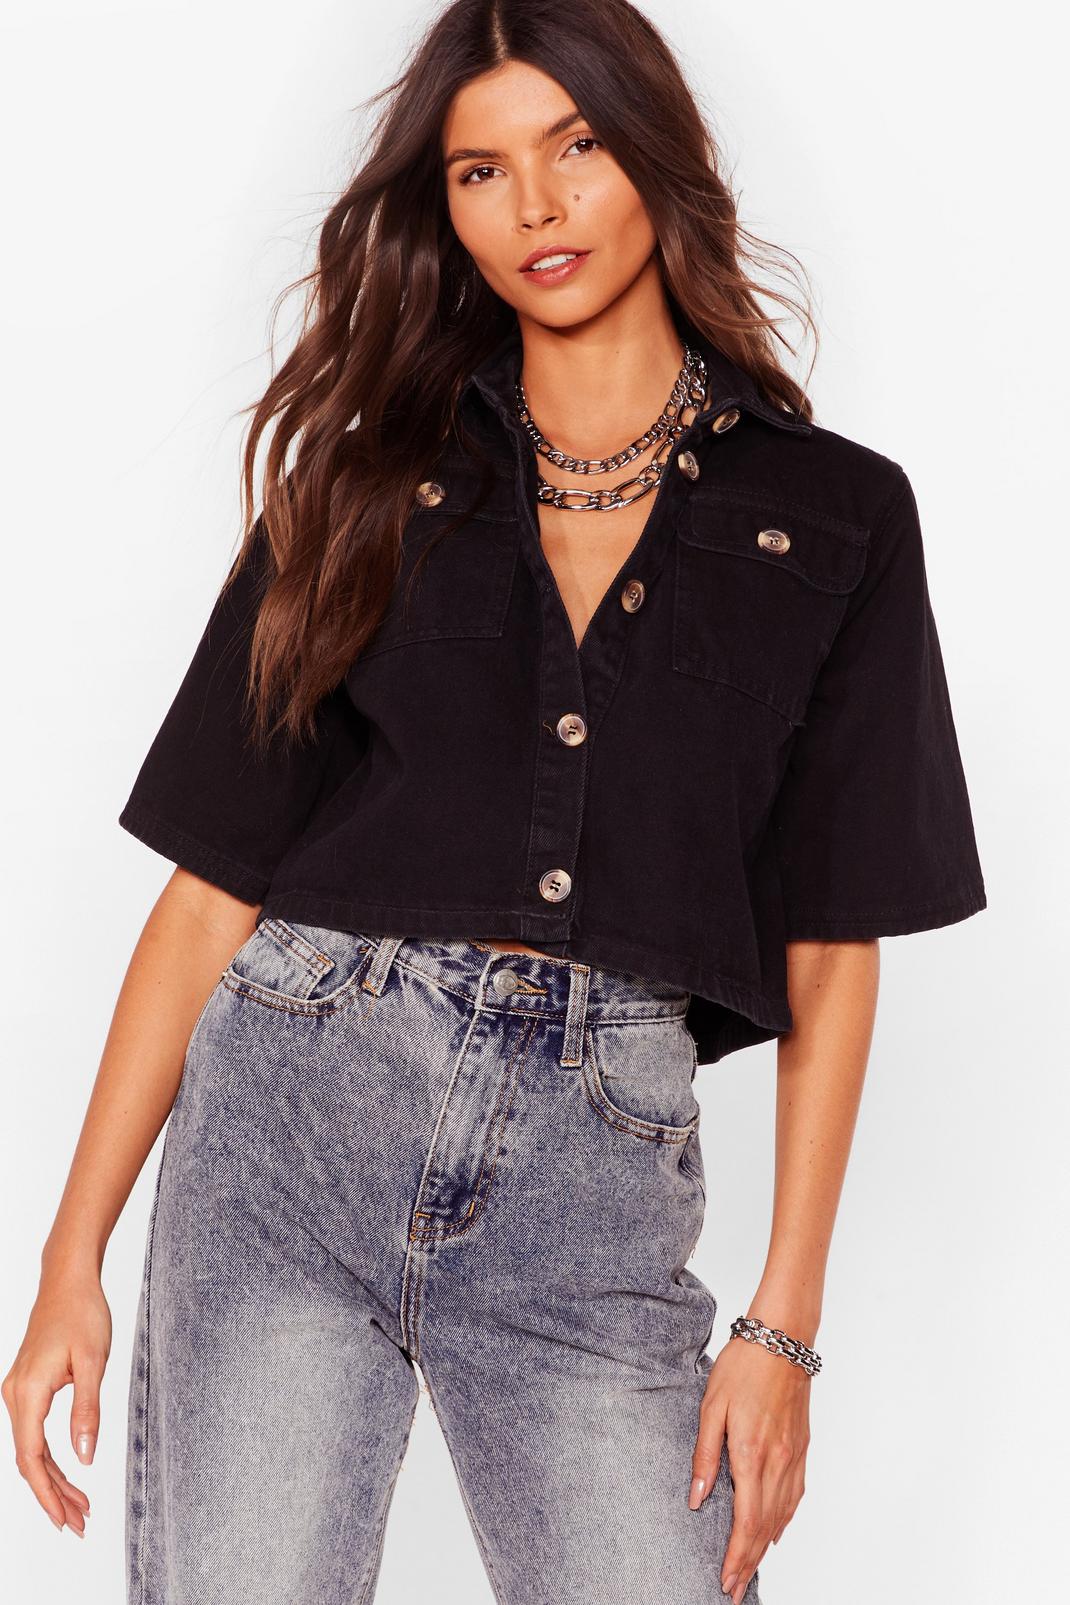 Out of the Boxy Button-Down Cropped Shirt | Nasty Gal